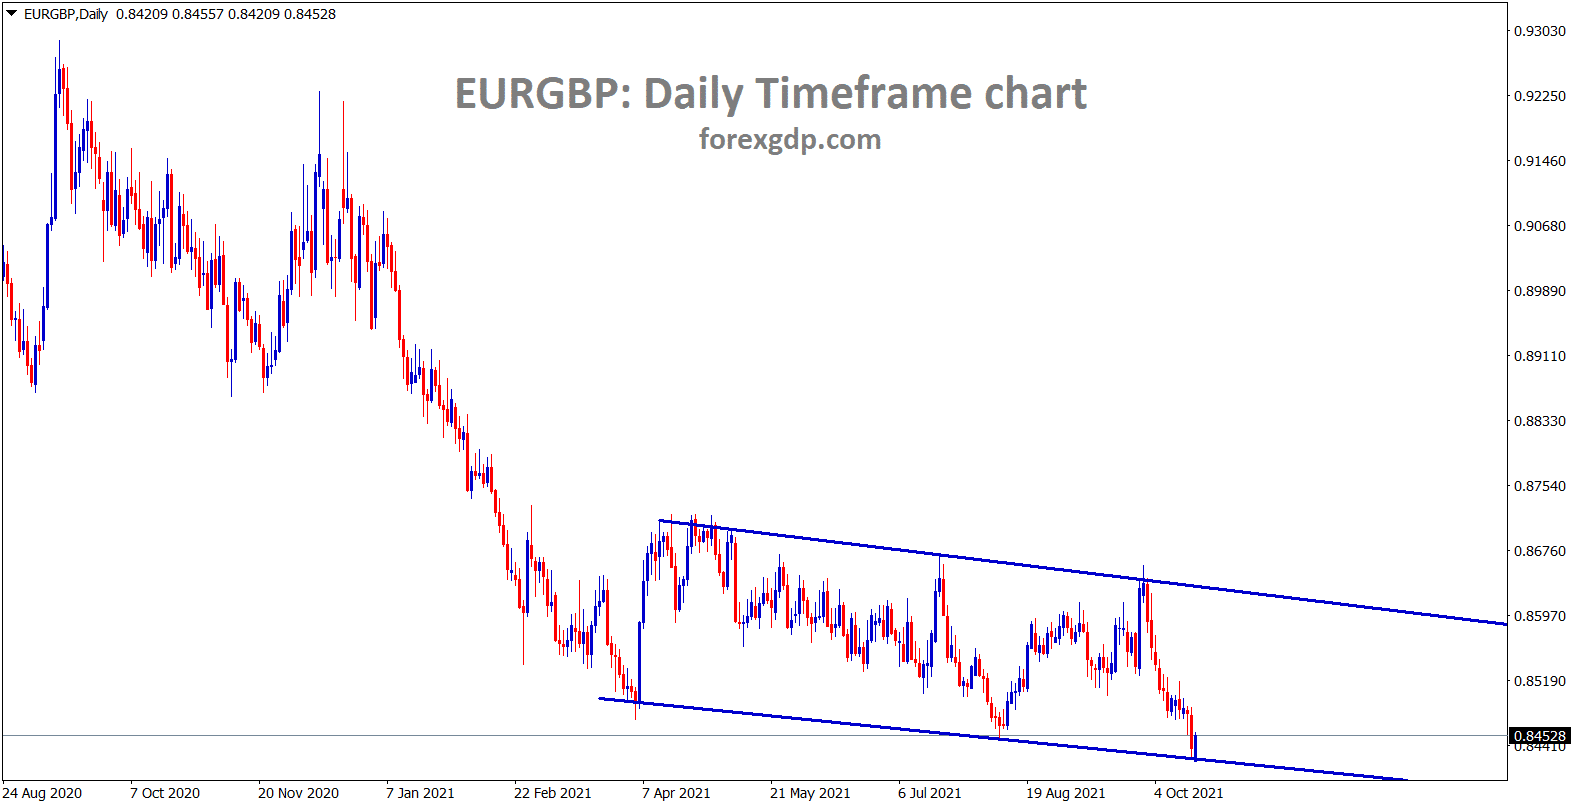 EURGBP is moving between the specific price ranges